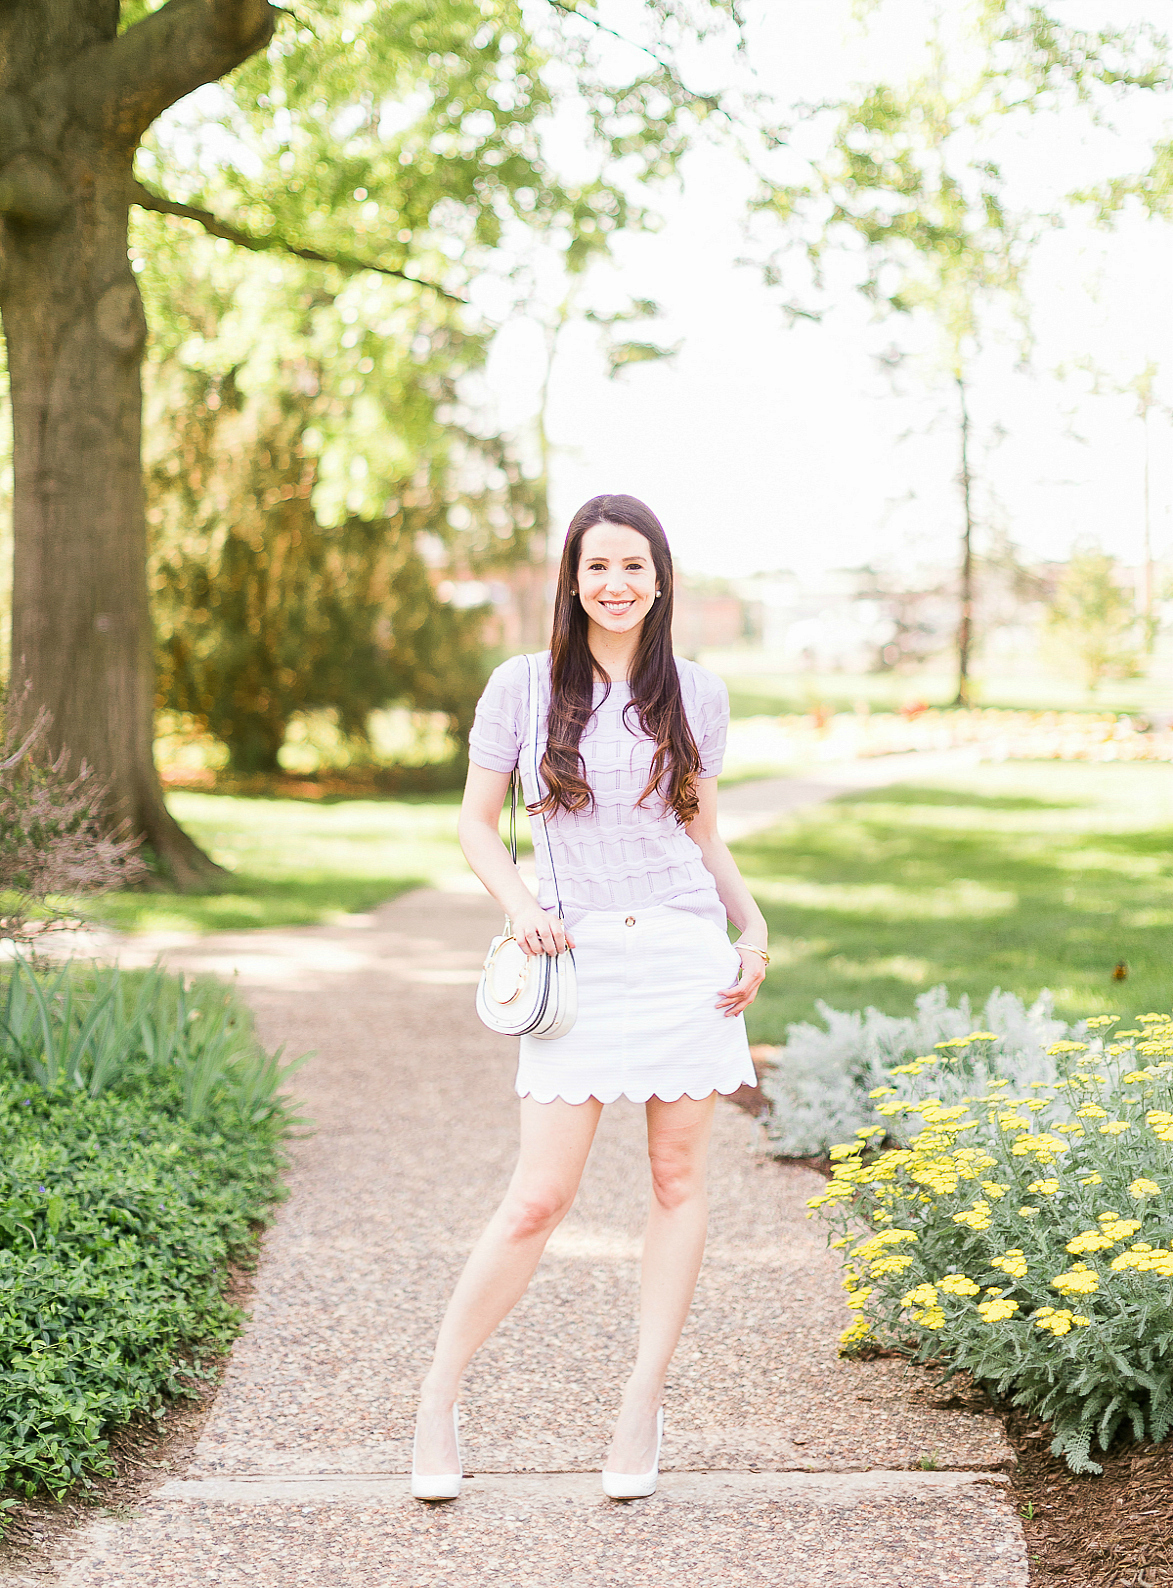 How to wear a short sleeve sweater in the spring by southern fashion blogger Stephanie Ziajka from Diary of a Debutante, lilac Cable Stitch short sleeve sweater, Lilly Pulitzer scalloped mini skirt, white Chloe Nile dupe bag, Chloe dupe bags, Kendra Scott mixed metal bangle set